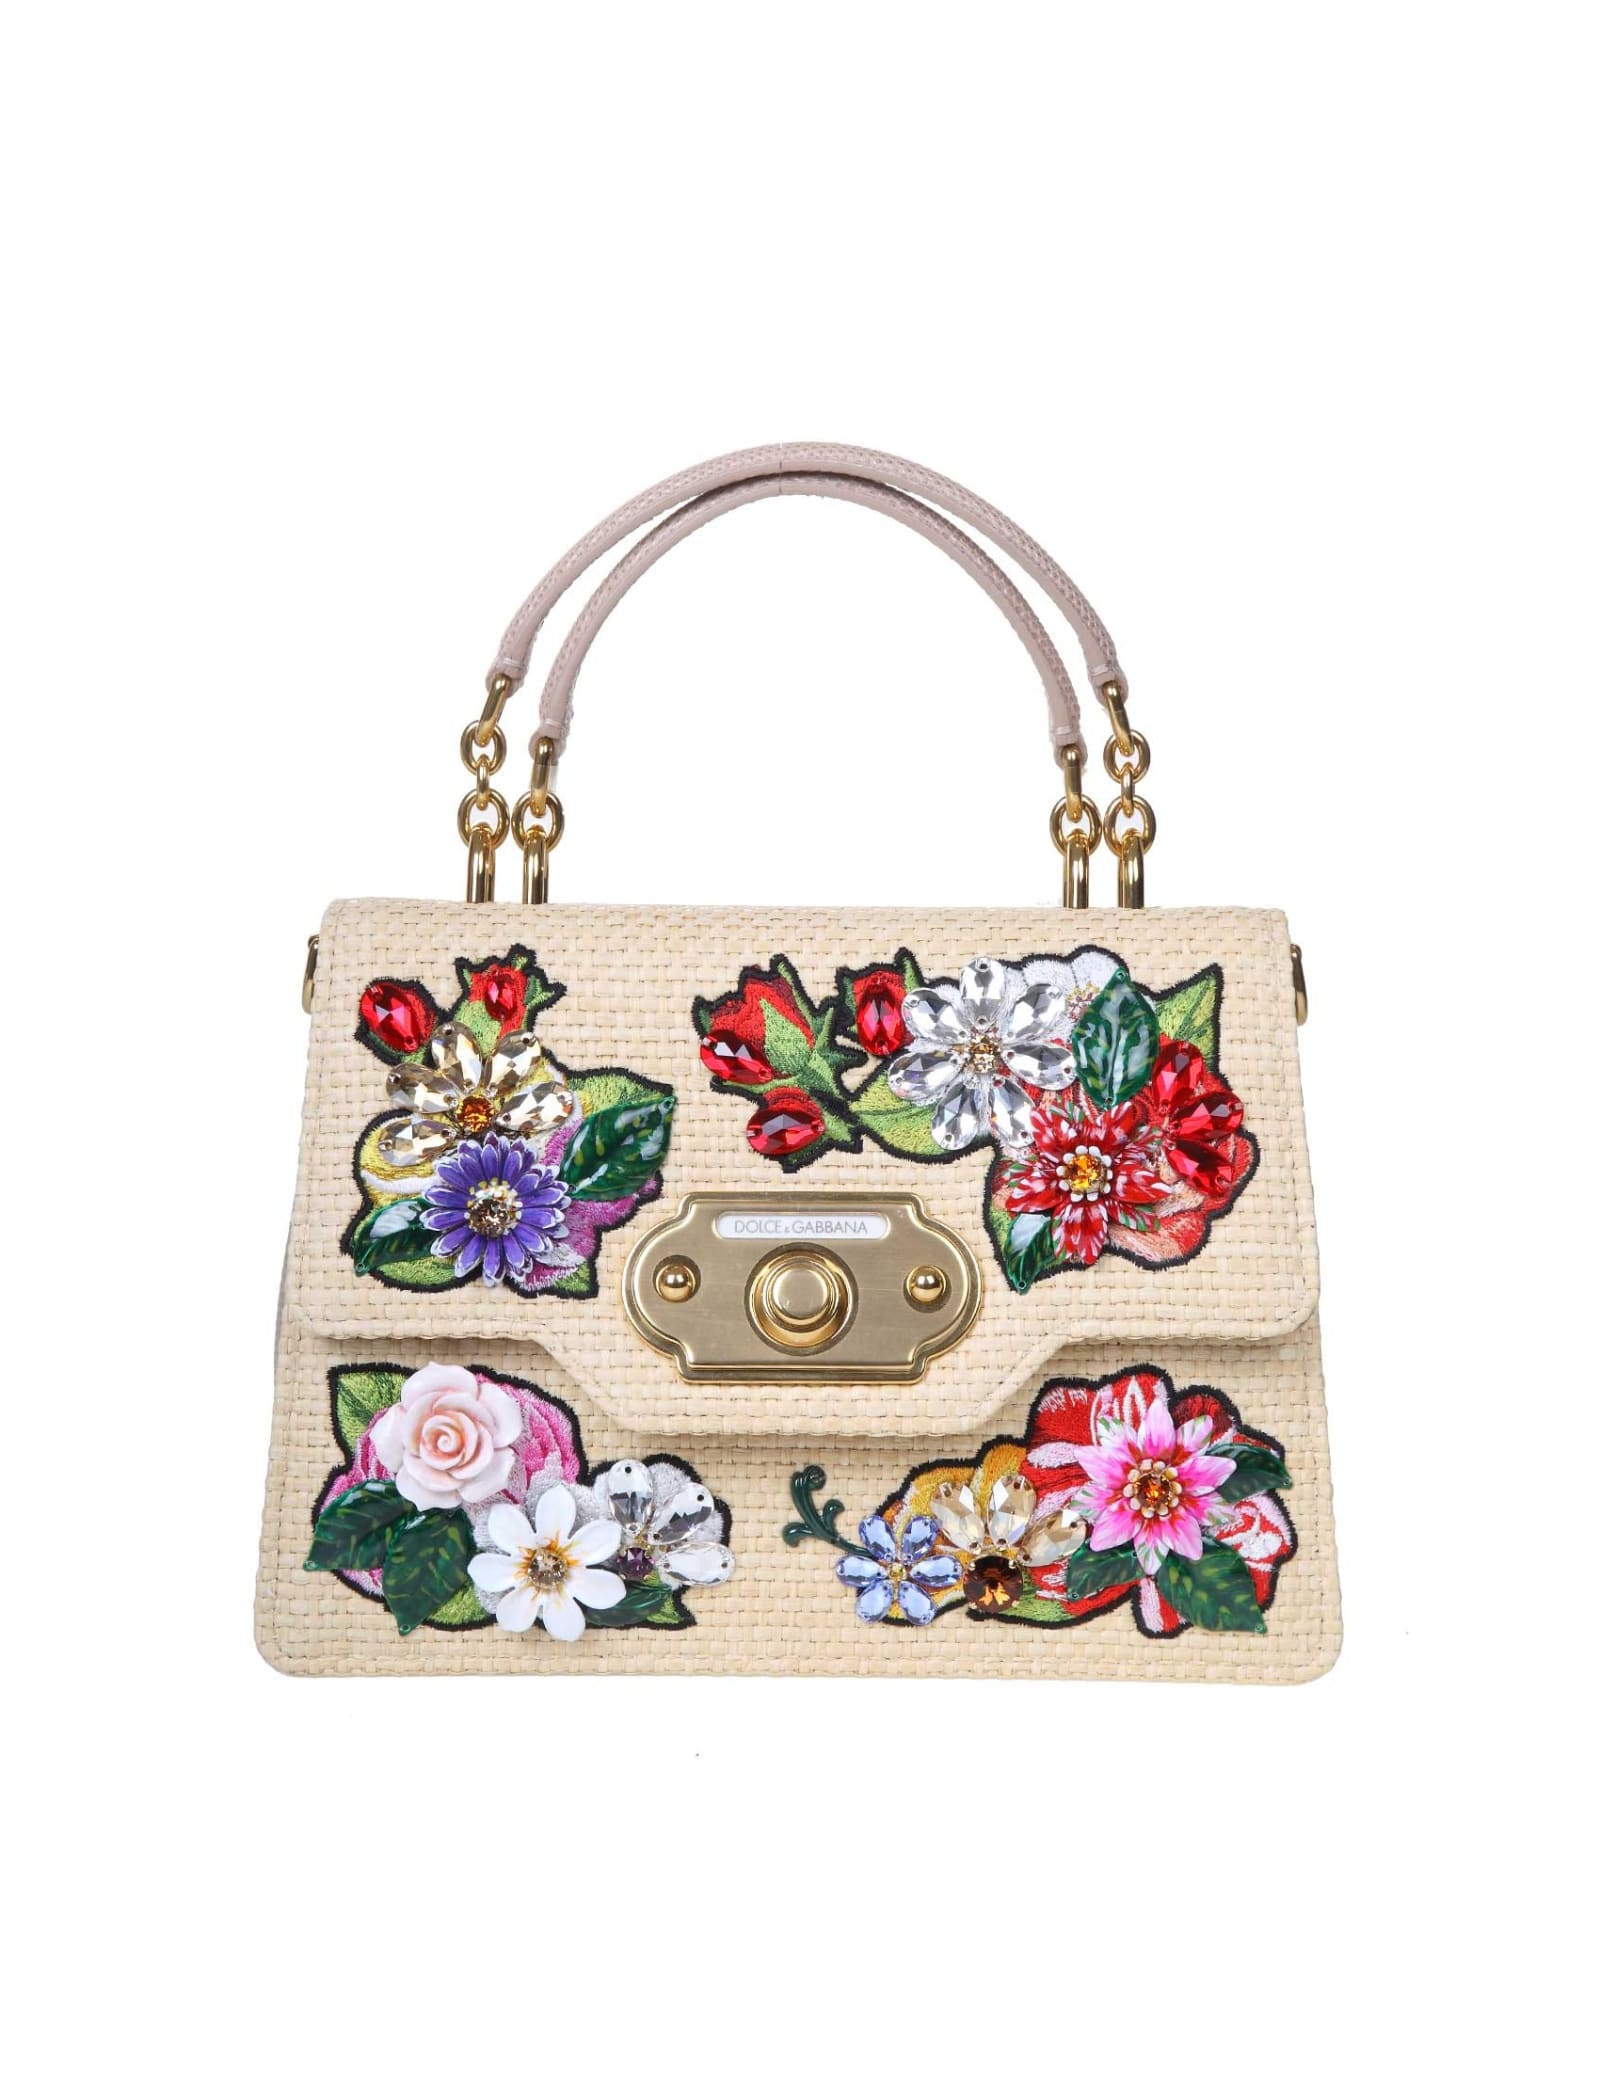 DOLCE & GABBANA WELCOME HANDBAG IN RAFFIA AND LEATHER WITH FLORAL DETAILS,11244811